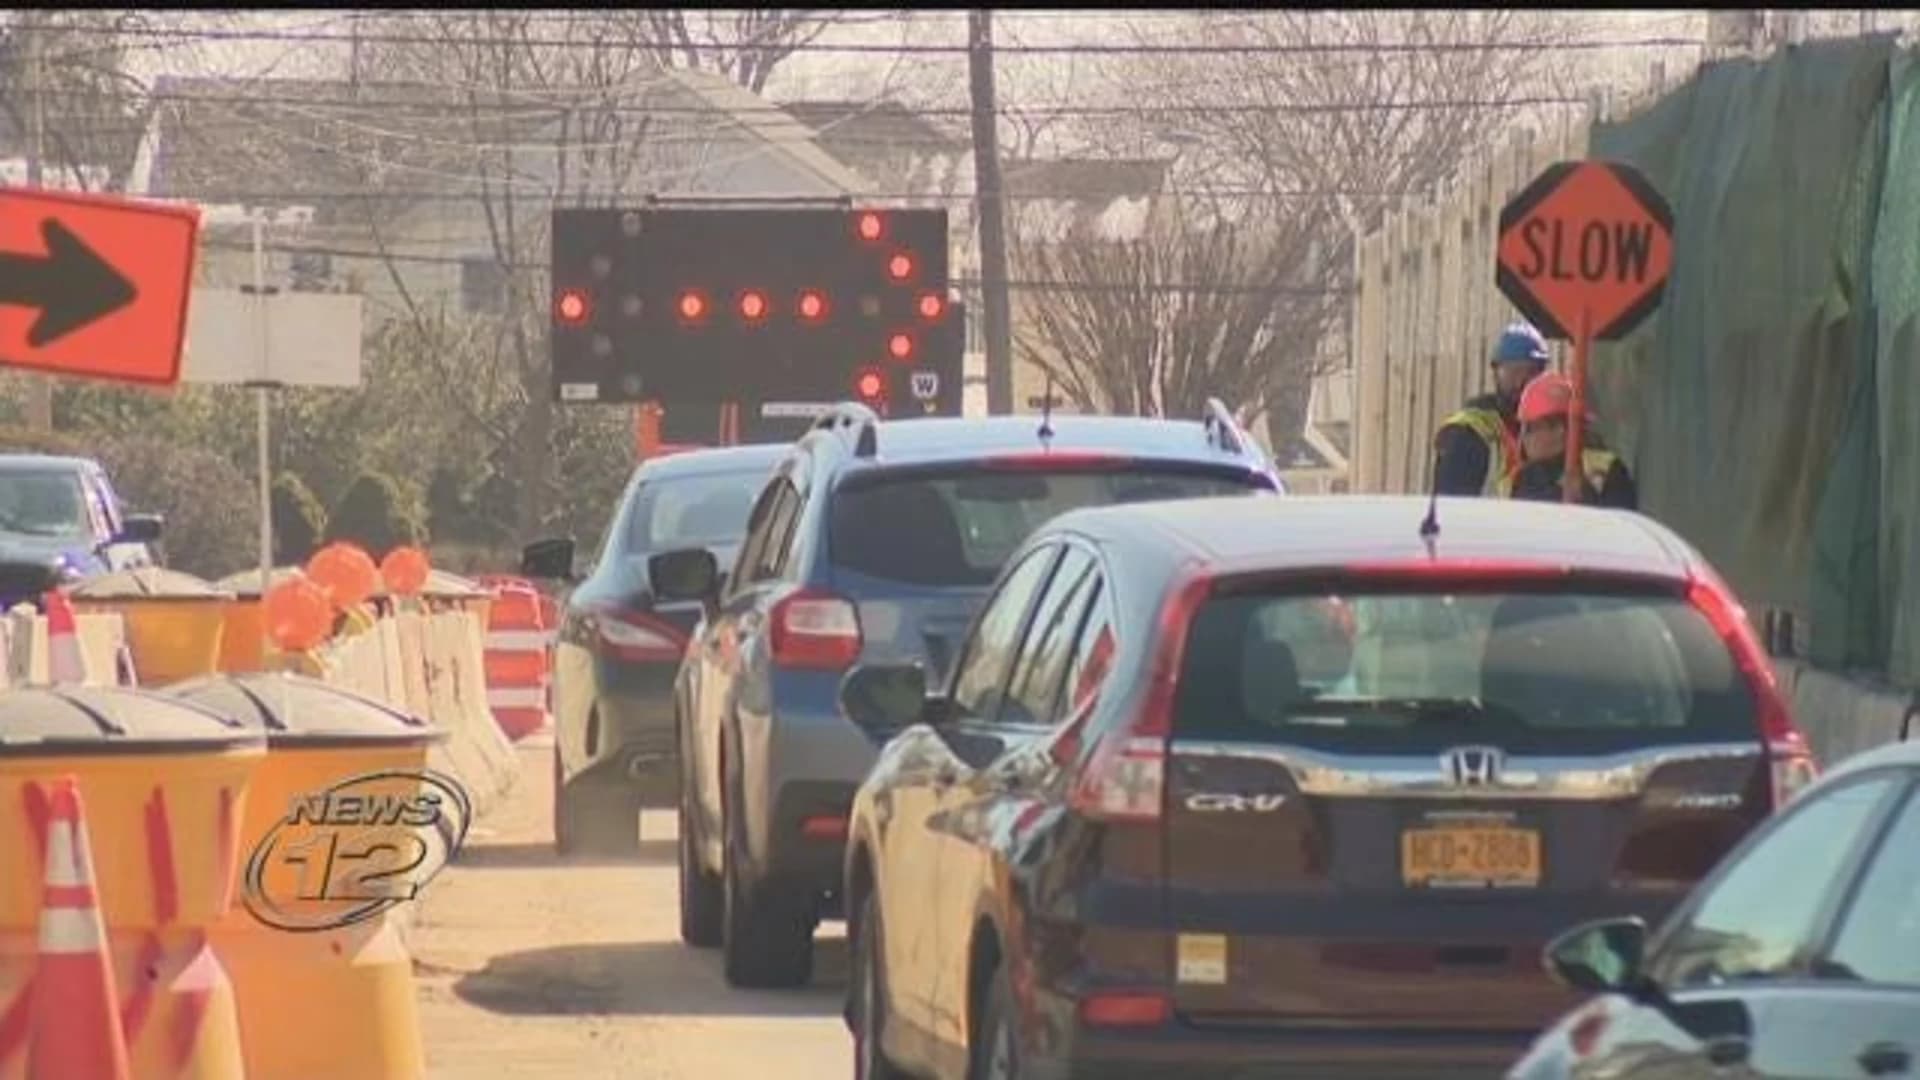 Nassau businesses brace for impacts from LIRR 3rd track work